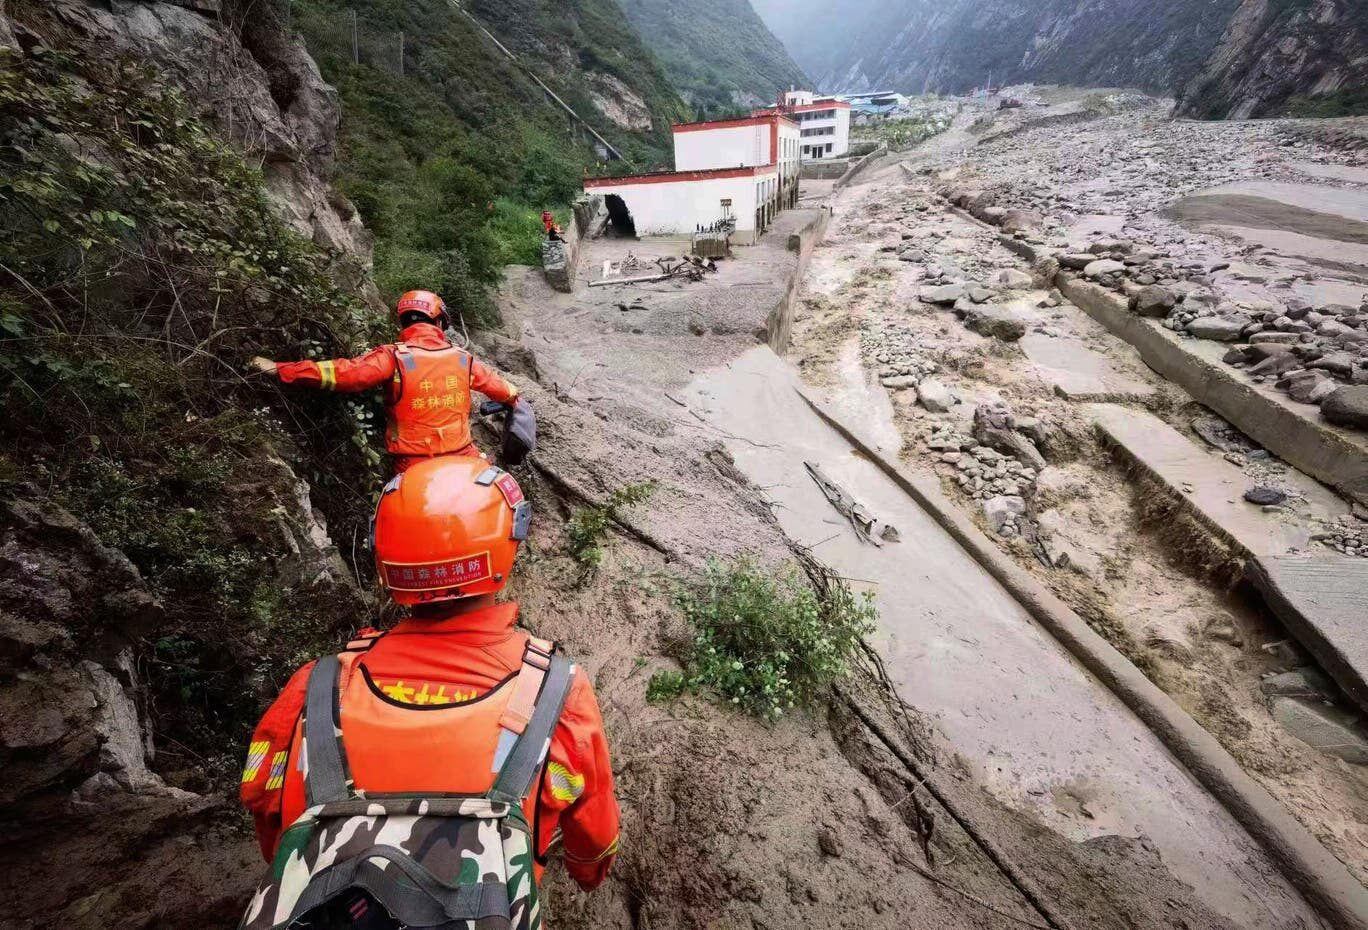 Four people have died and three others are missing after landslides hit a county in China’s southwestern Sichuan province, leading authorities to evacuate more than 900 people